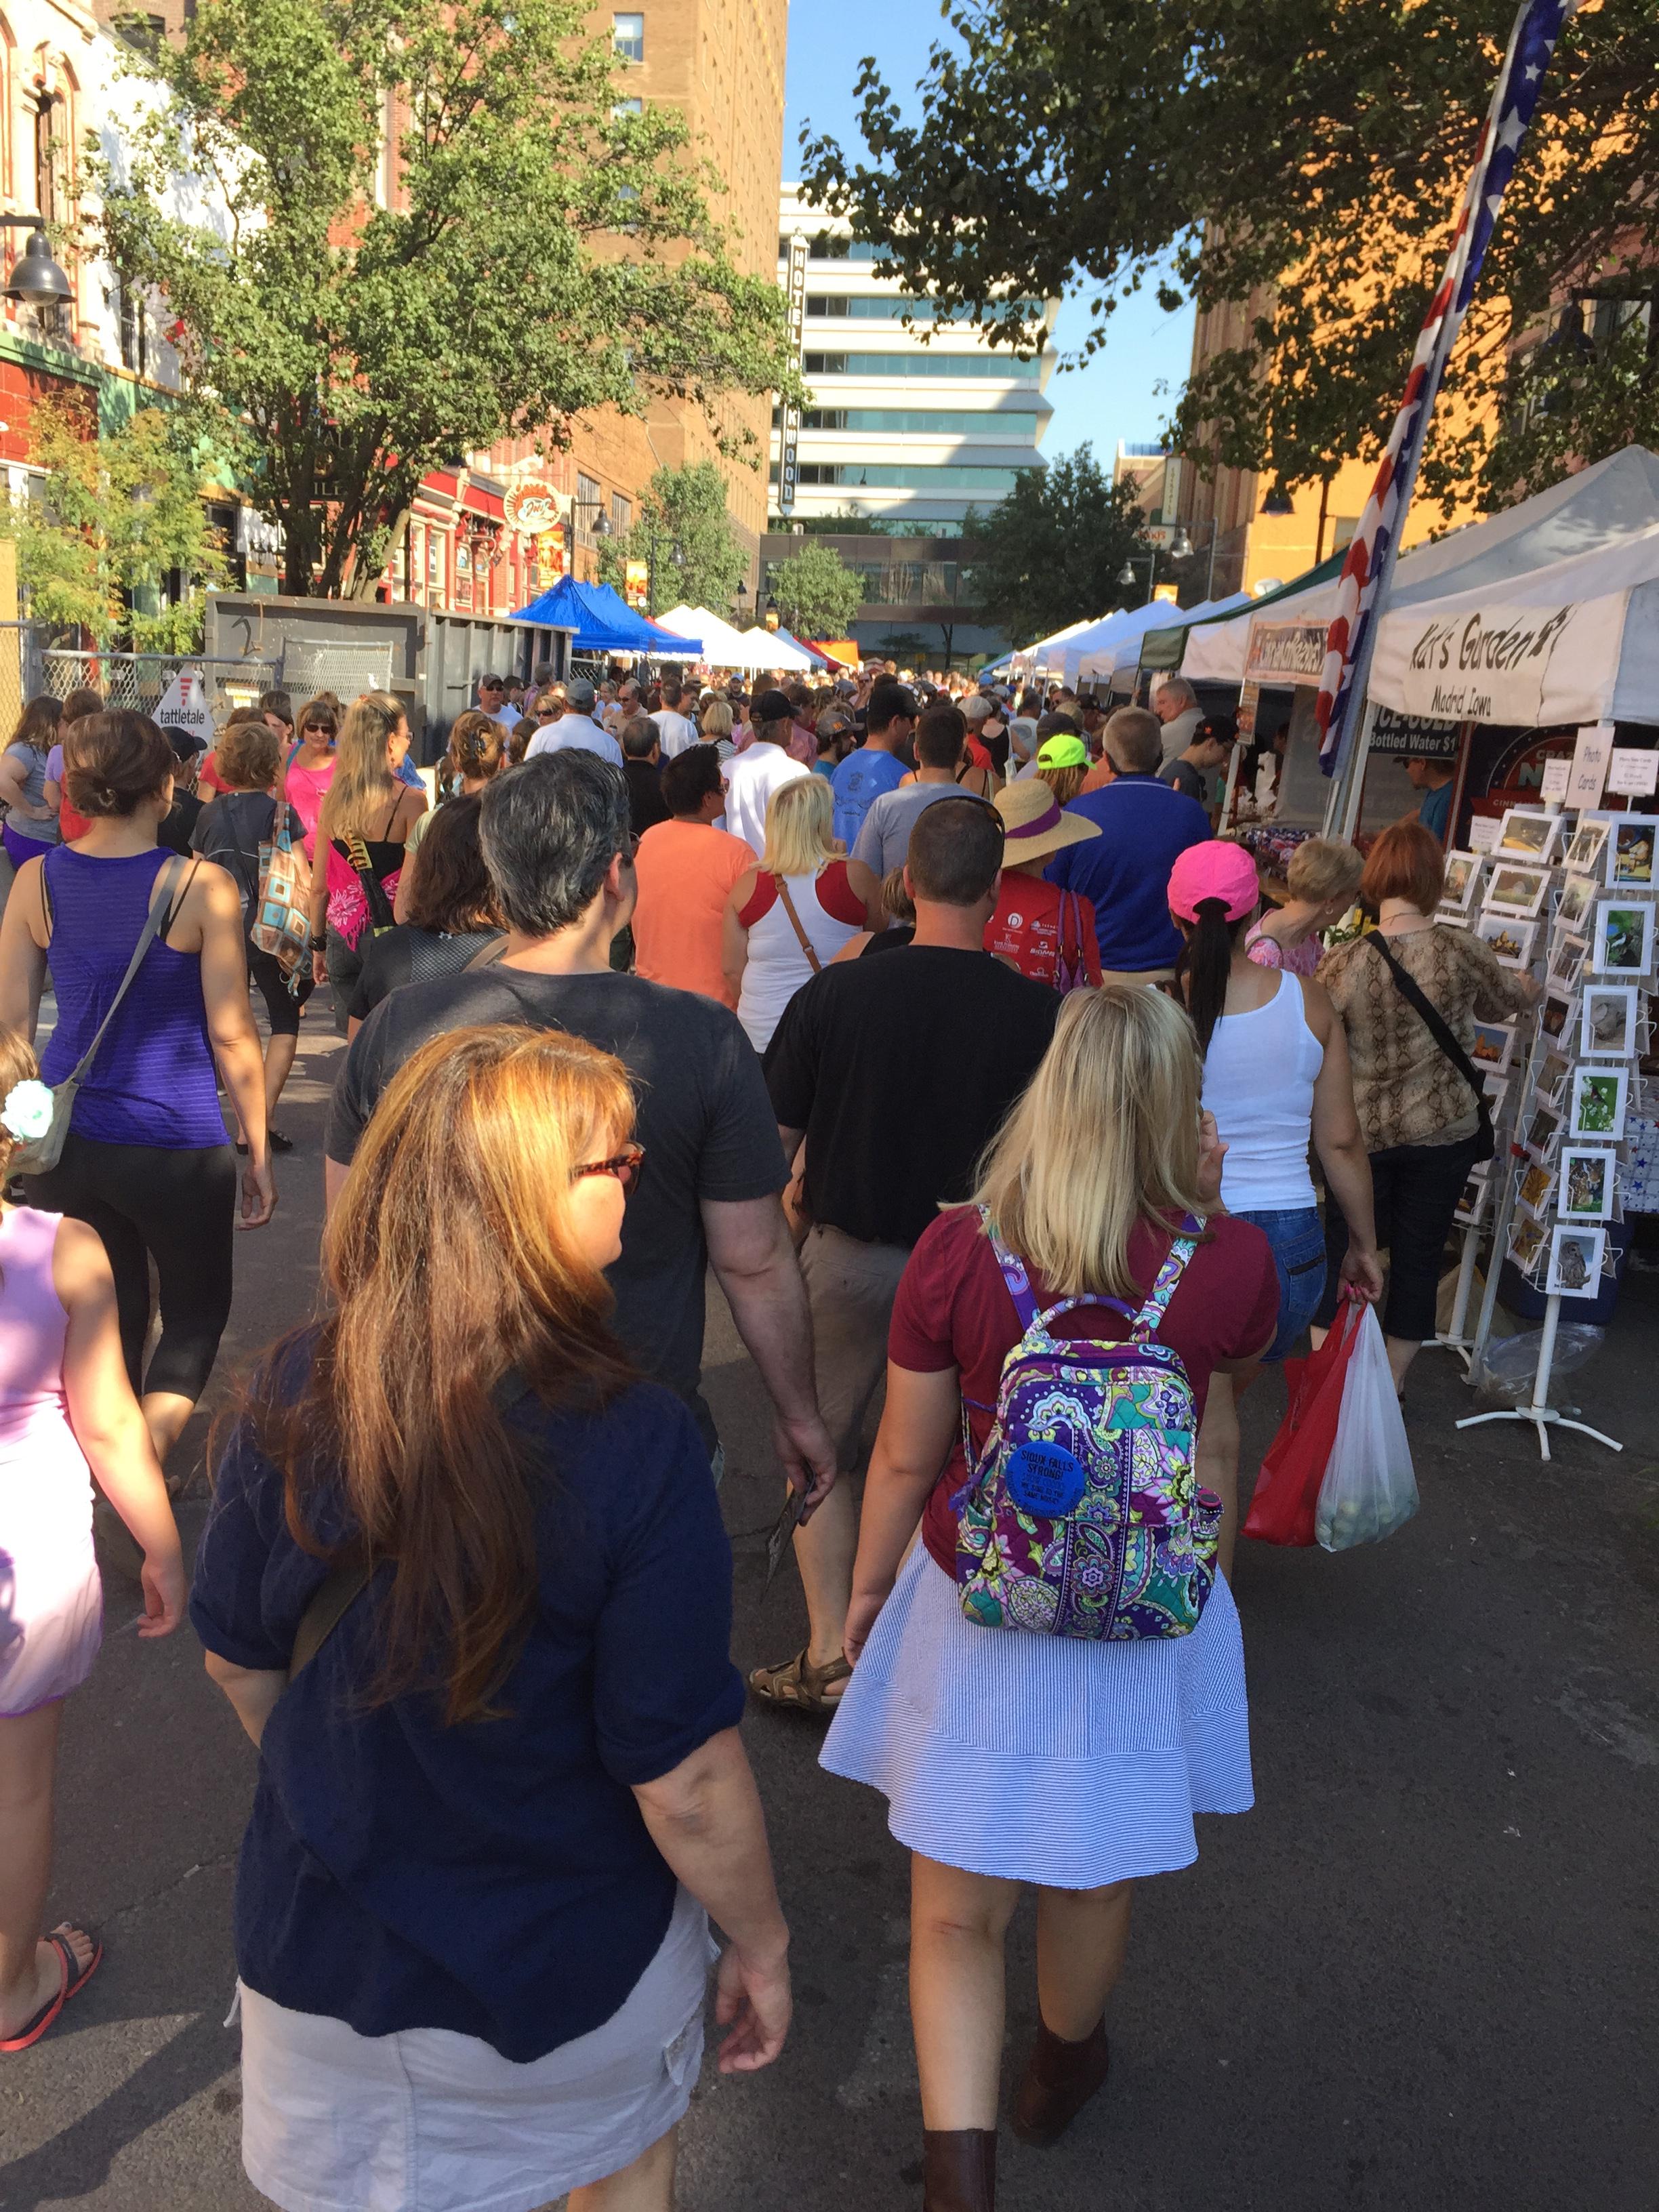 DSM Downtown Farmers' Market is open every Sat. 7am-noon. It is ranked #2 in the US (behind Seattle).